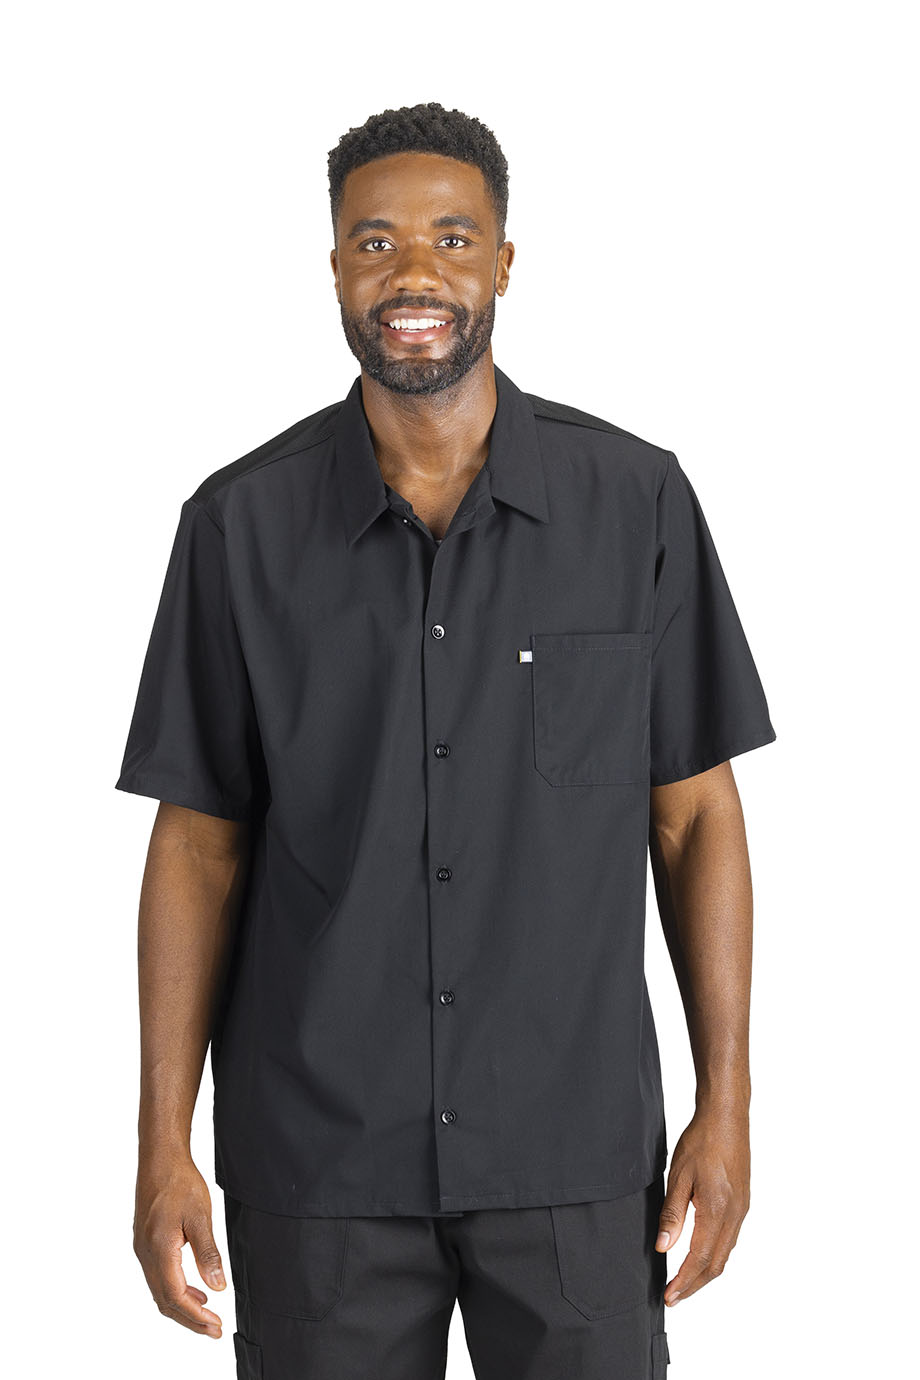 COOK SHIRT WITH MESH BACK | Edwards Garment